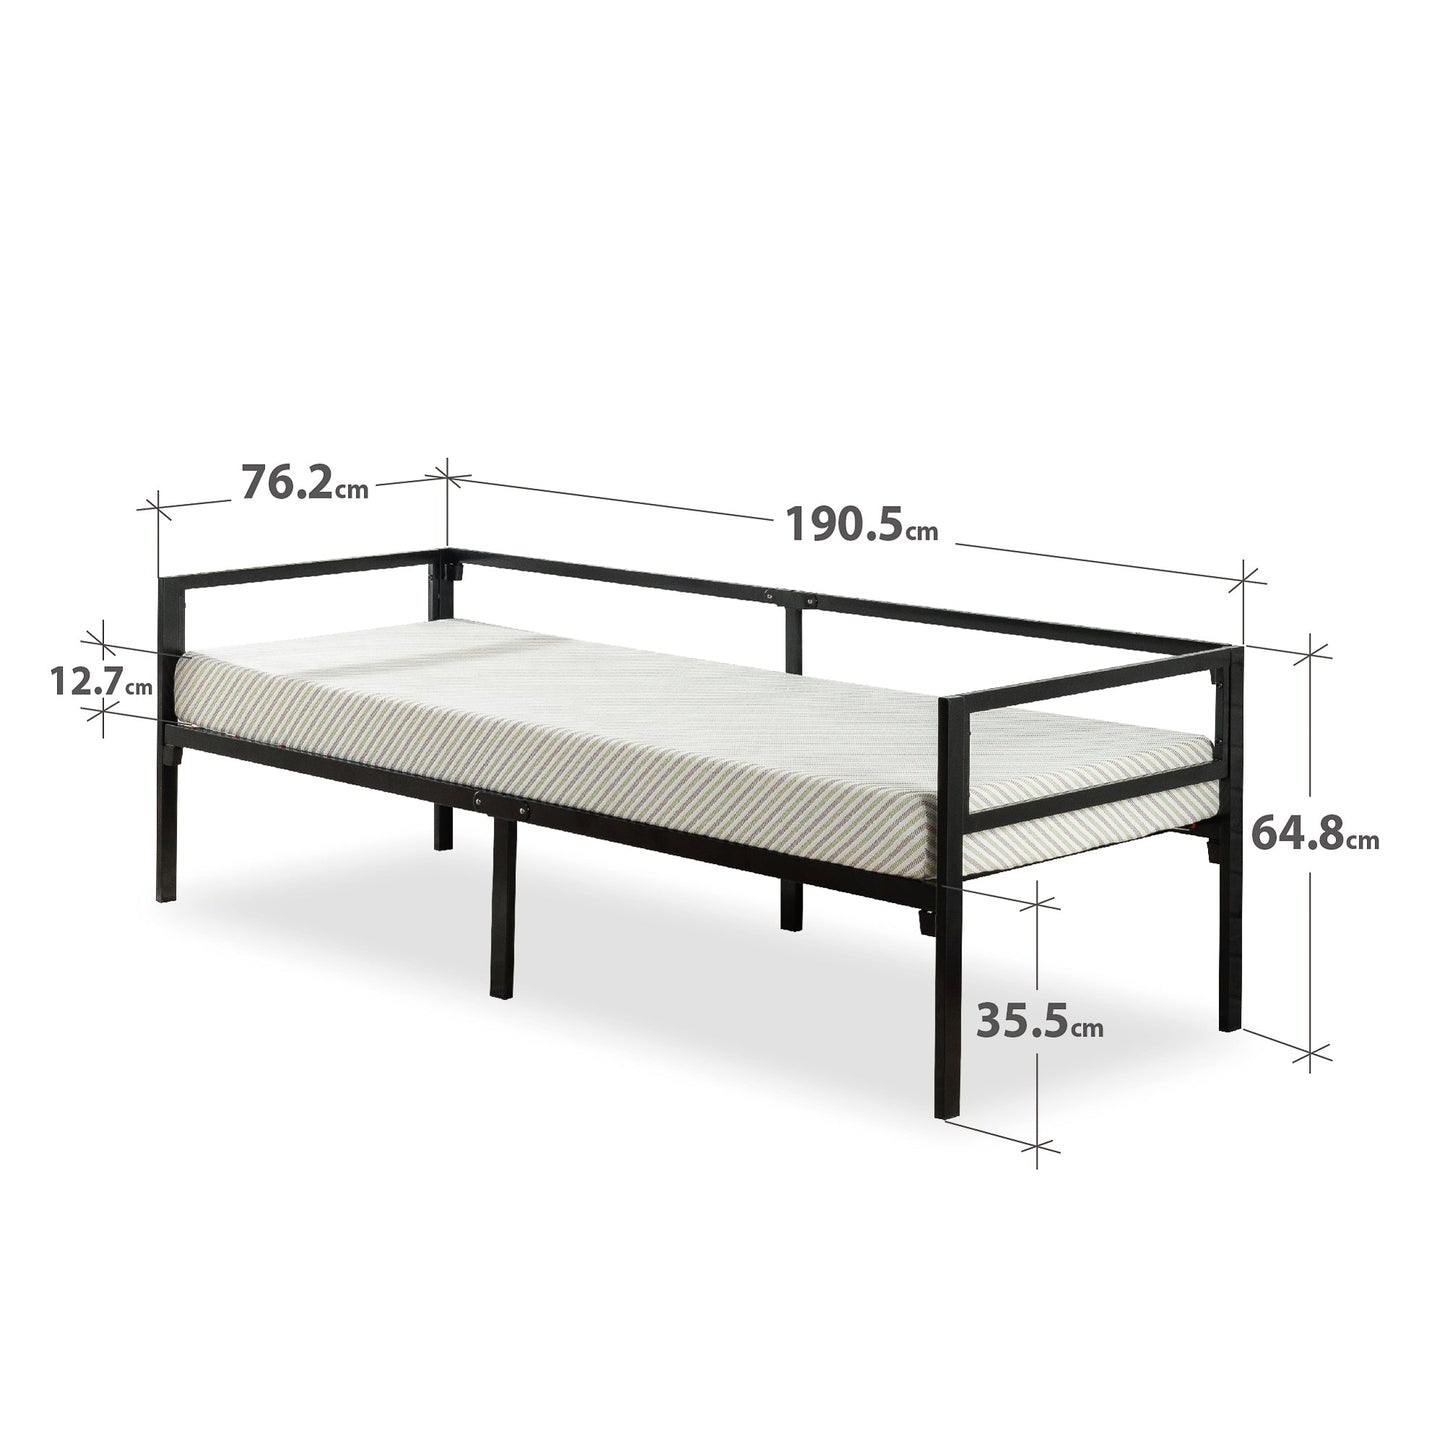 Quick Lock Metal Daybed with Memory Foam Mattress